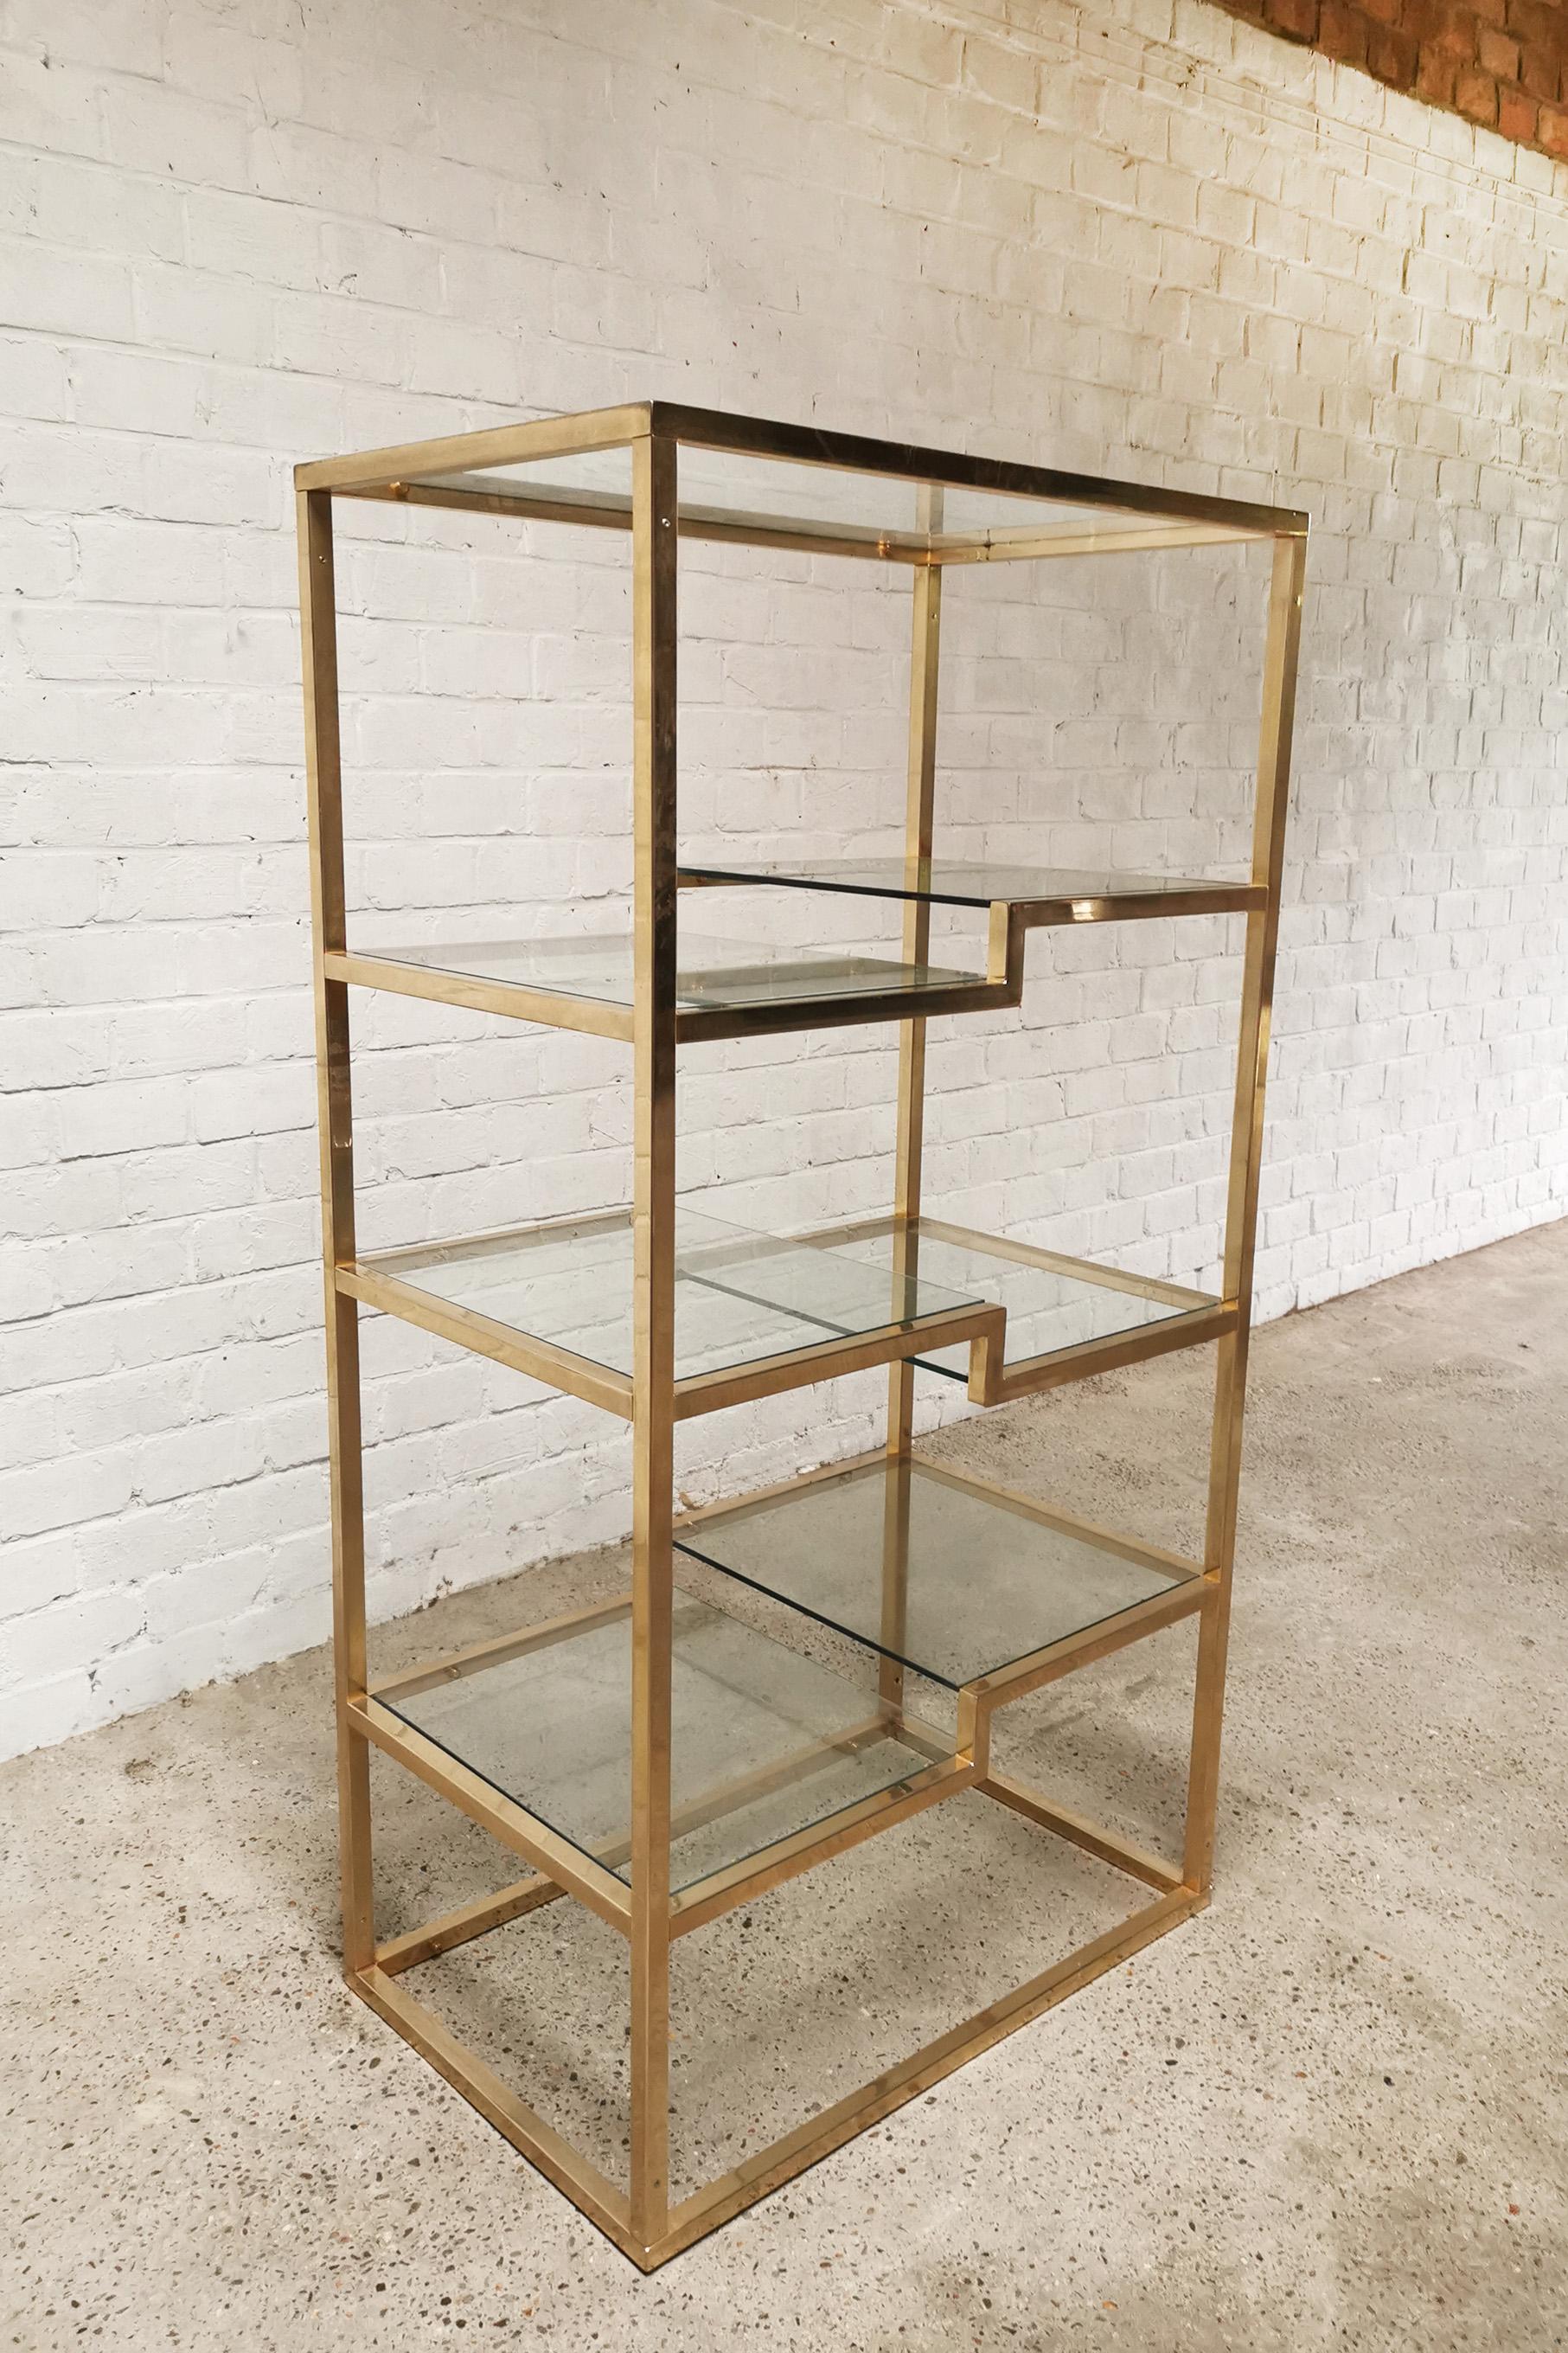 Hollywood Regency Vintage Geometric Gold-plated Shelving Unit by Belgo Chrom, 1970s For Sale